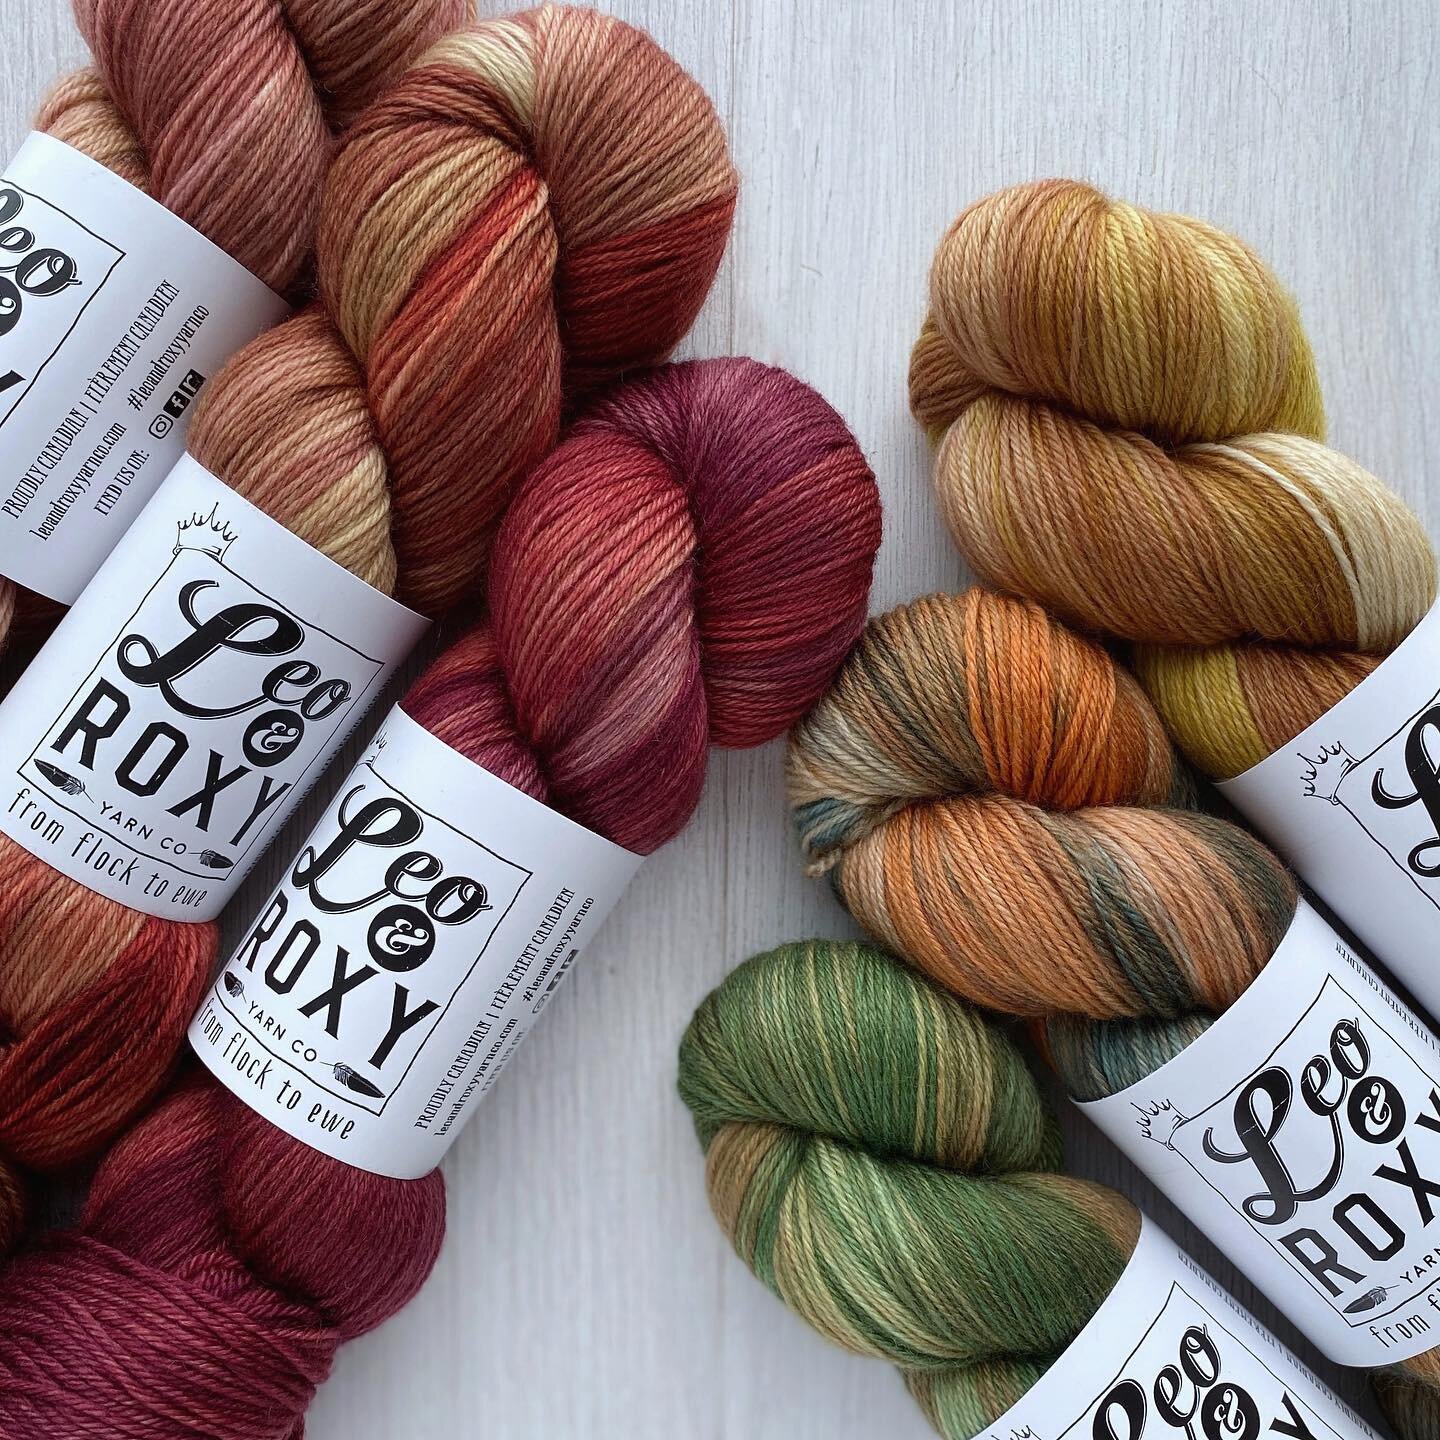 More yarn-a-day colours. Because they are just so pretty. 😊

SHOP Online | Link in Bio 

#leoandroxyyarnco #colourfulyarn #brightyarn #indiedyer #handdyedyarn #indiedyersofinstagram #indiedyedyarn #indiedyerslife #handdyed #yarnologist #indiedyersof